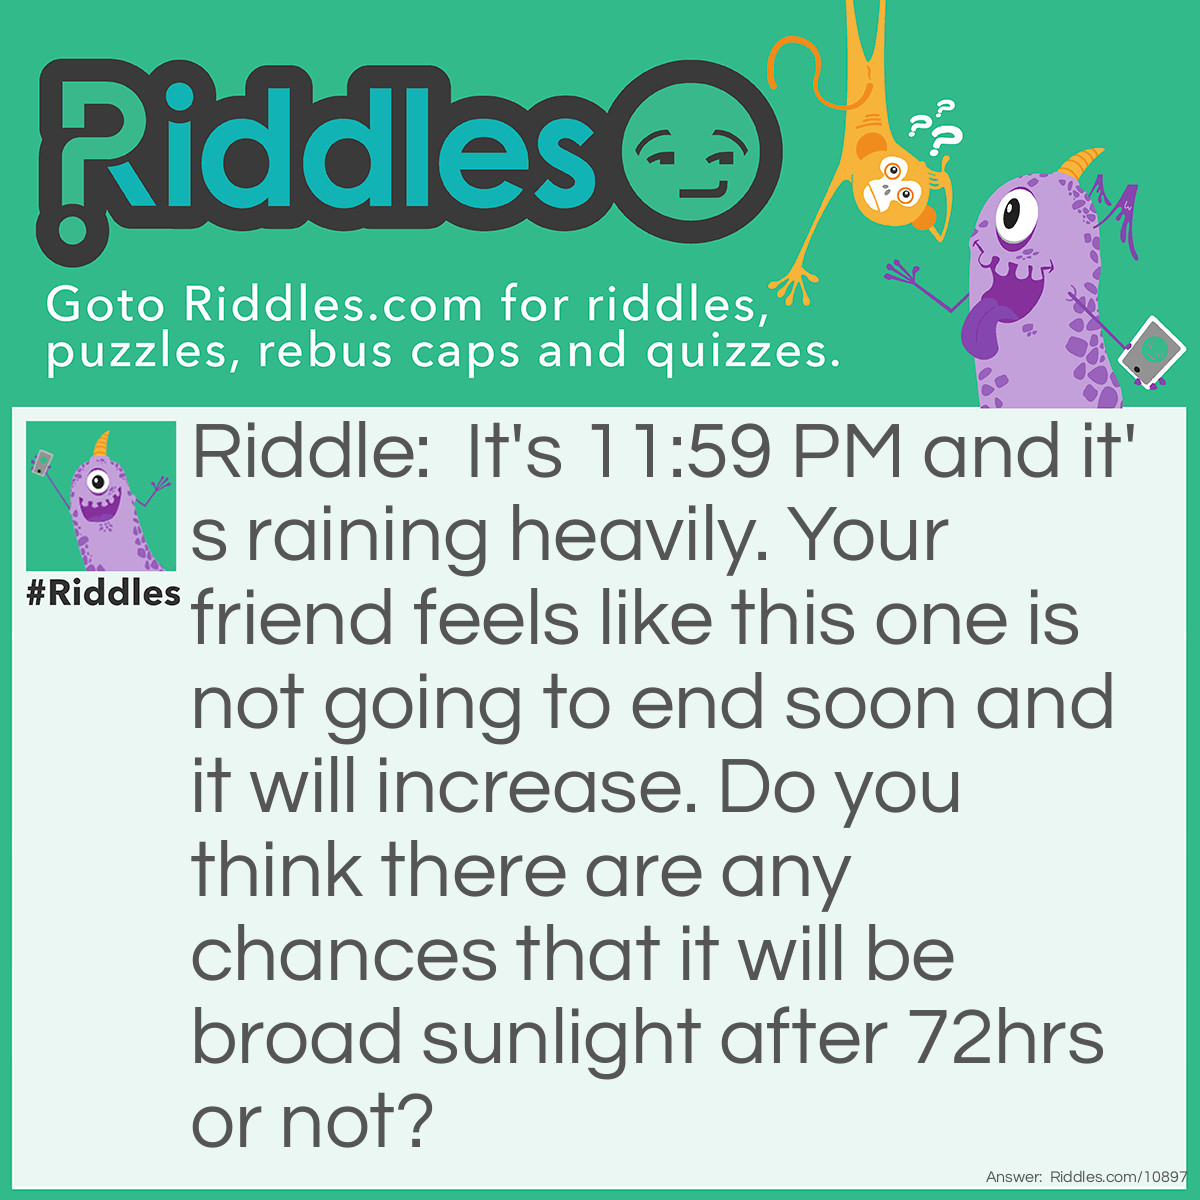 Riddle: It's 11:59 PM and it's raining heavily. Your friend feels like this one is not going to end soon and it will increase. Do you think there are any chances that it will be broad sunlight after 72hrs or not? Answer: Of course not it will be night at 11:59 PM after the next 72 hrs! LoL!!